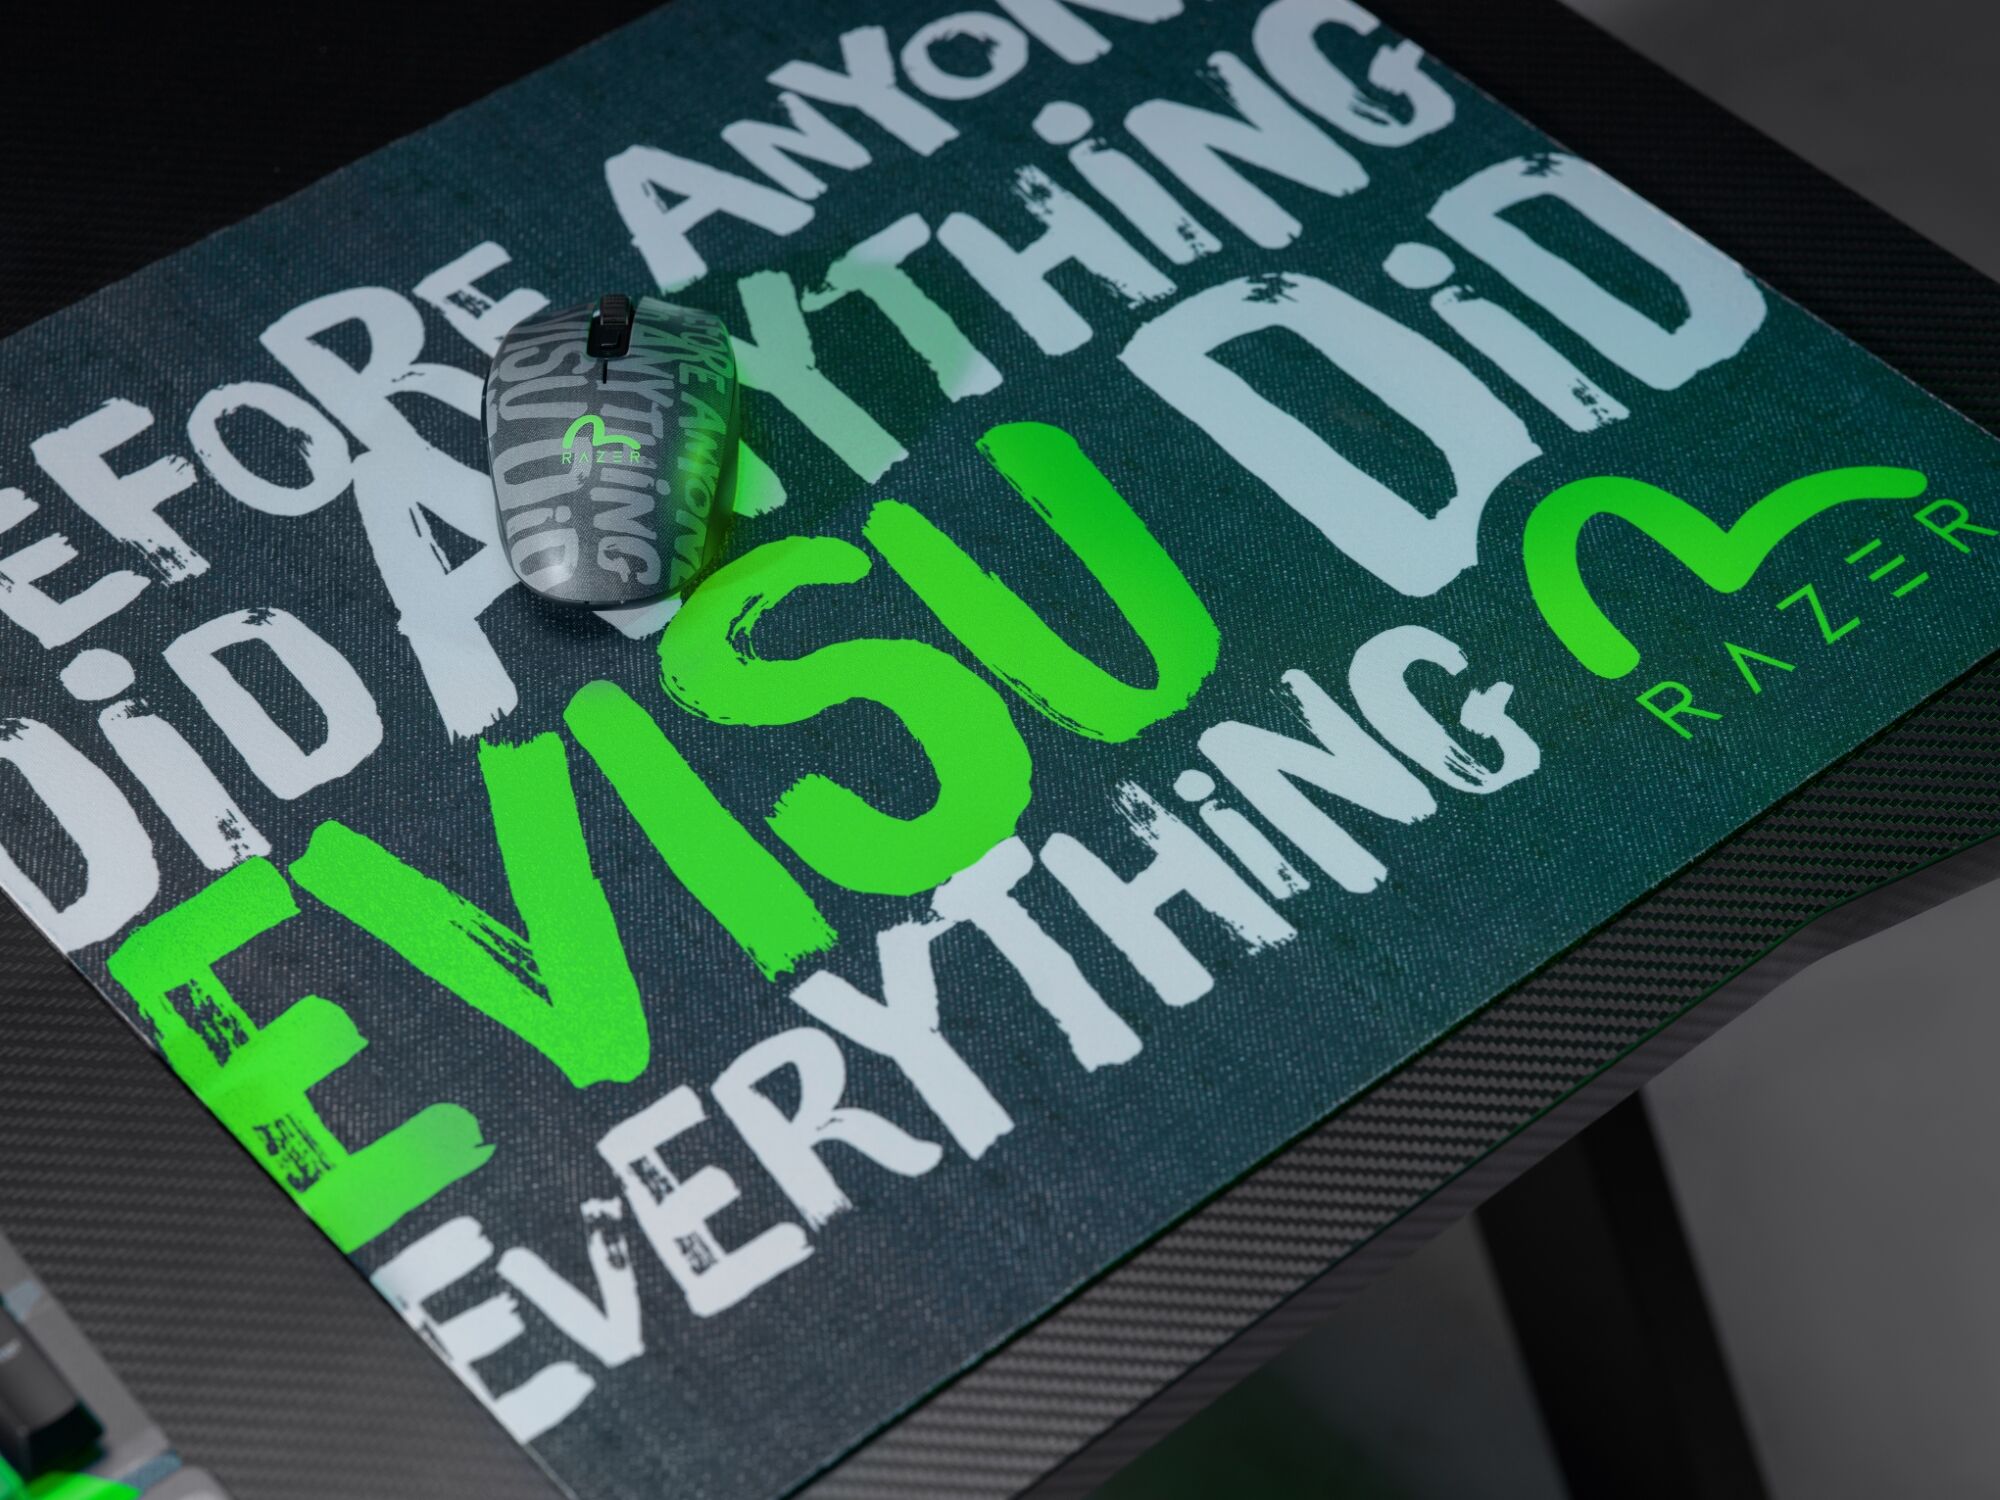 Razer And EVISU Teamed Up With Specially Designed Peripherals And Apparel 31